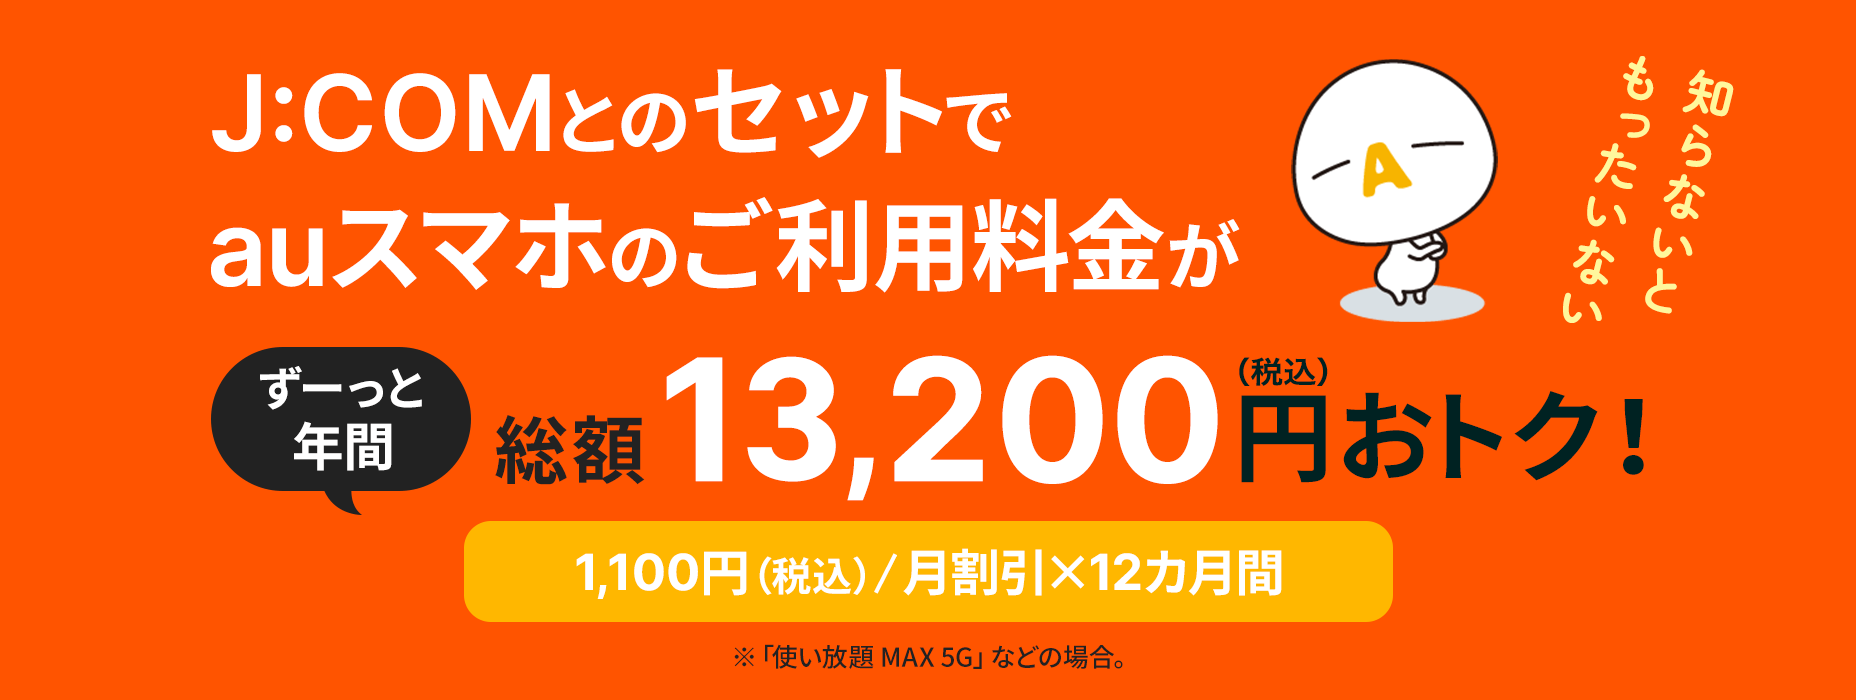 It's a waste if you don't know au smartphone usage fee is 13,200 yen (tax included) for a long time